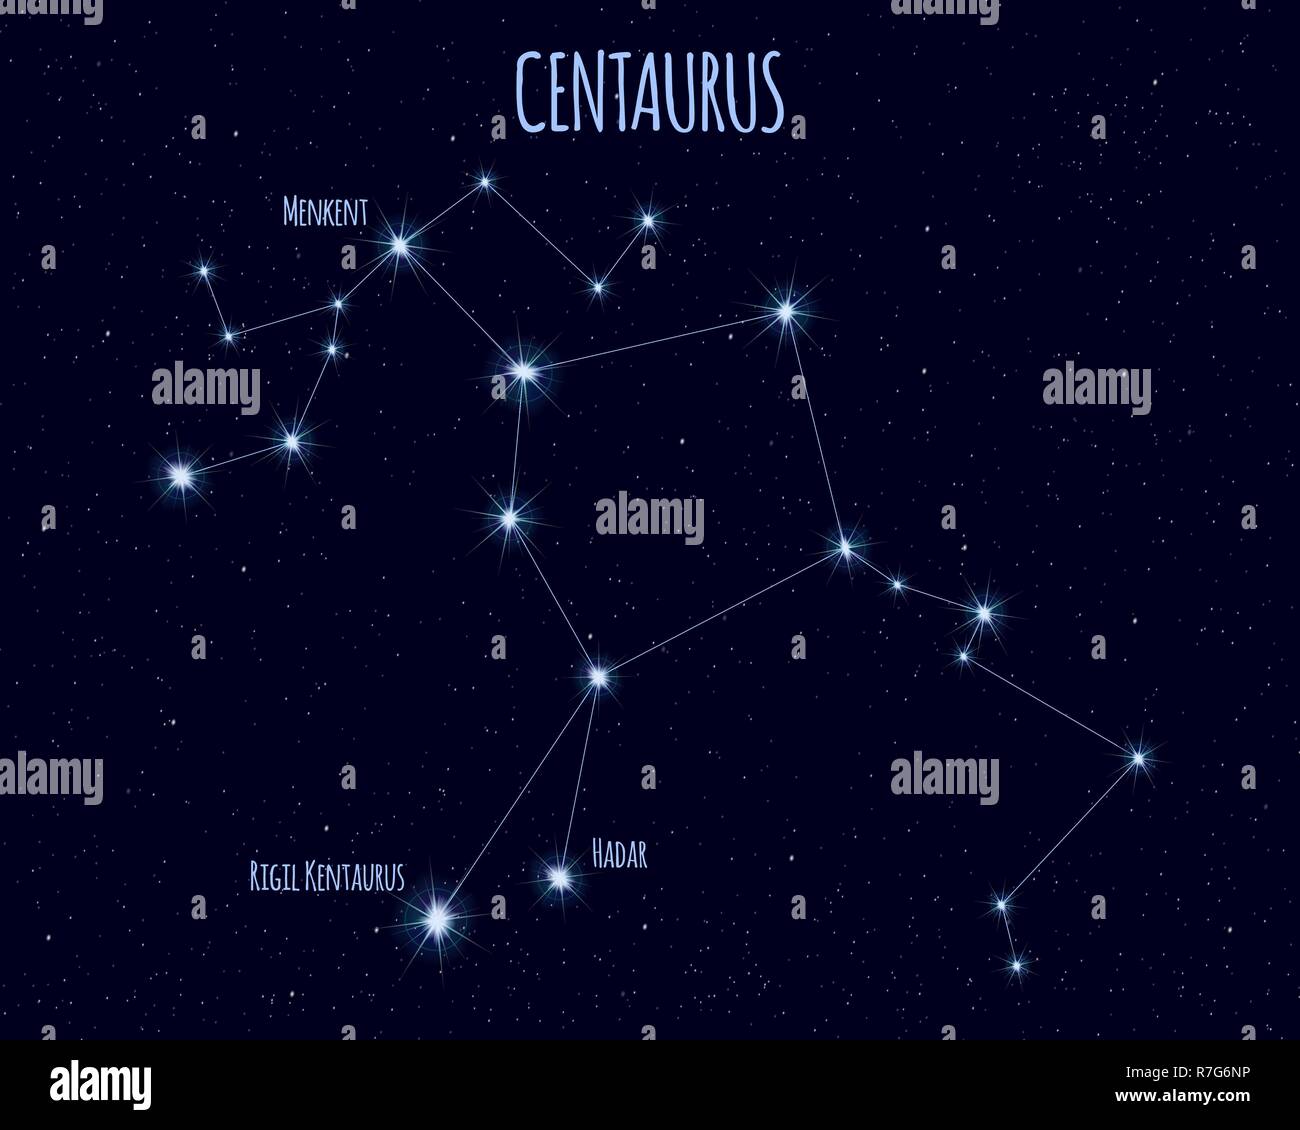 Centaurus (The Centaur) constellation, vector illustration with the names of basic stars against the starry sky Stock Vector